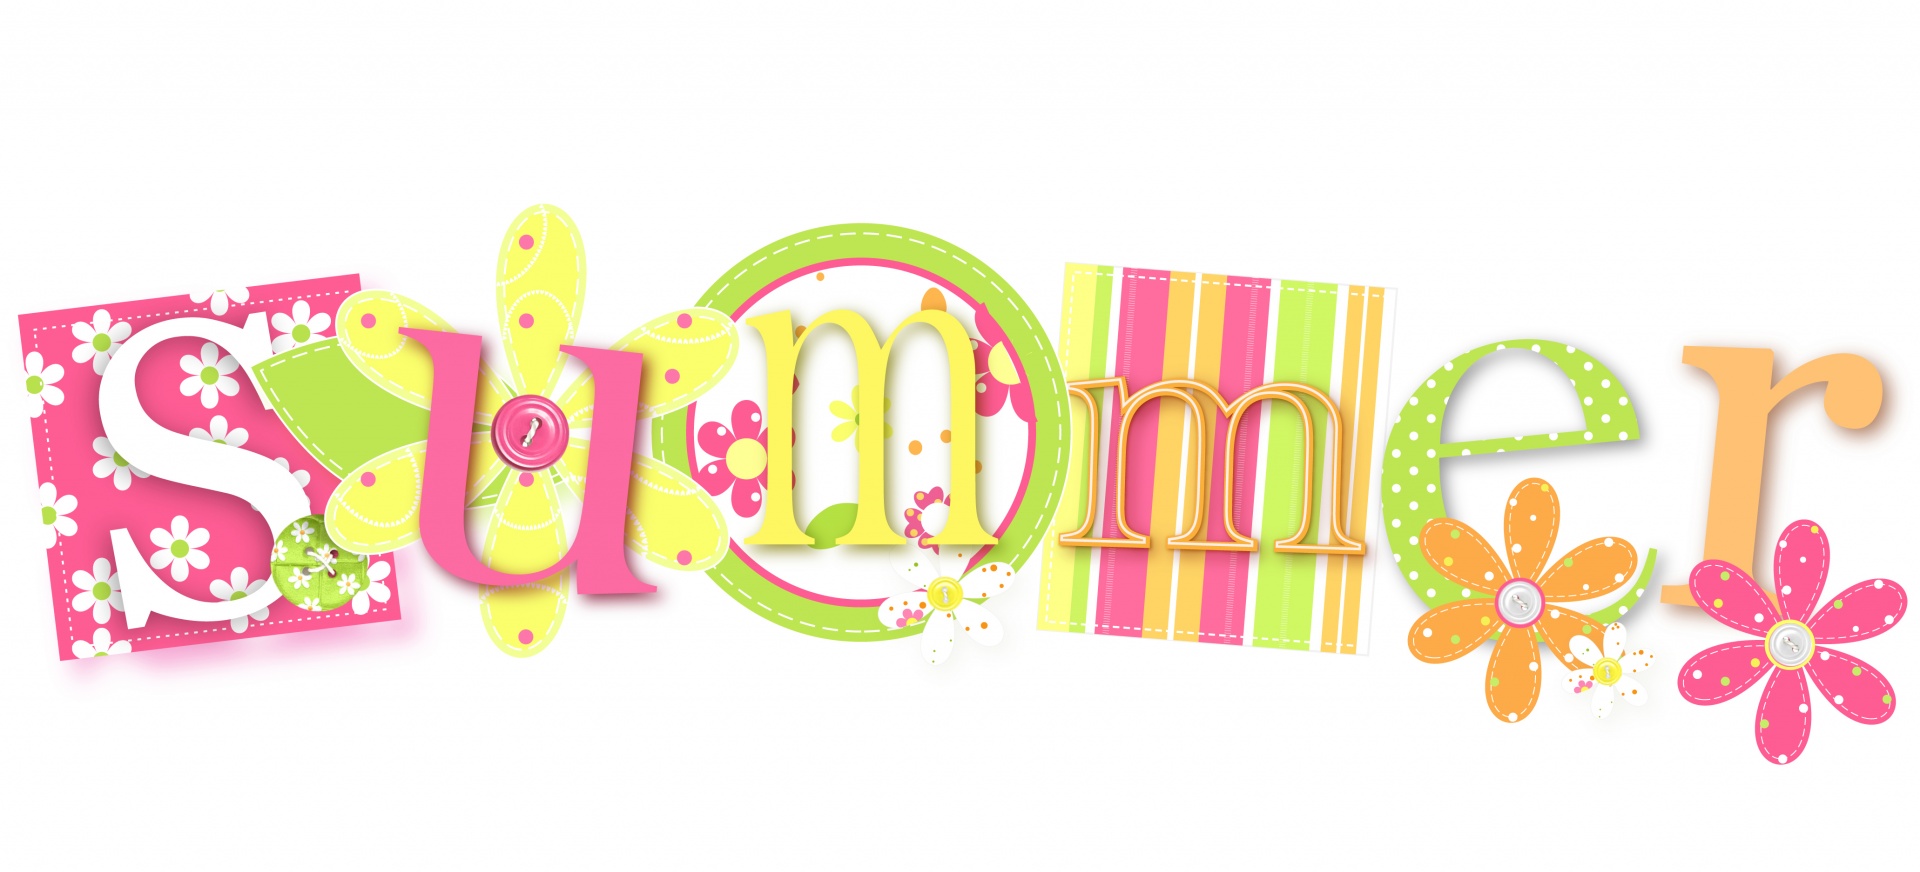 Summer Floral Text Background